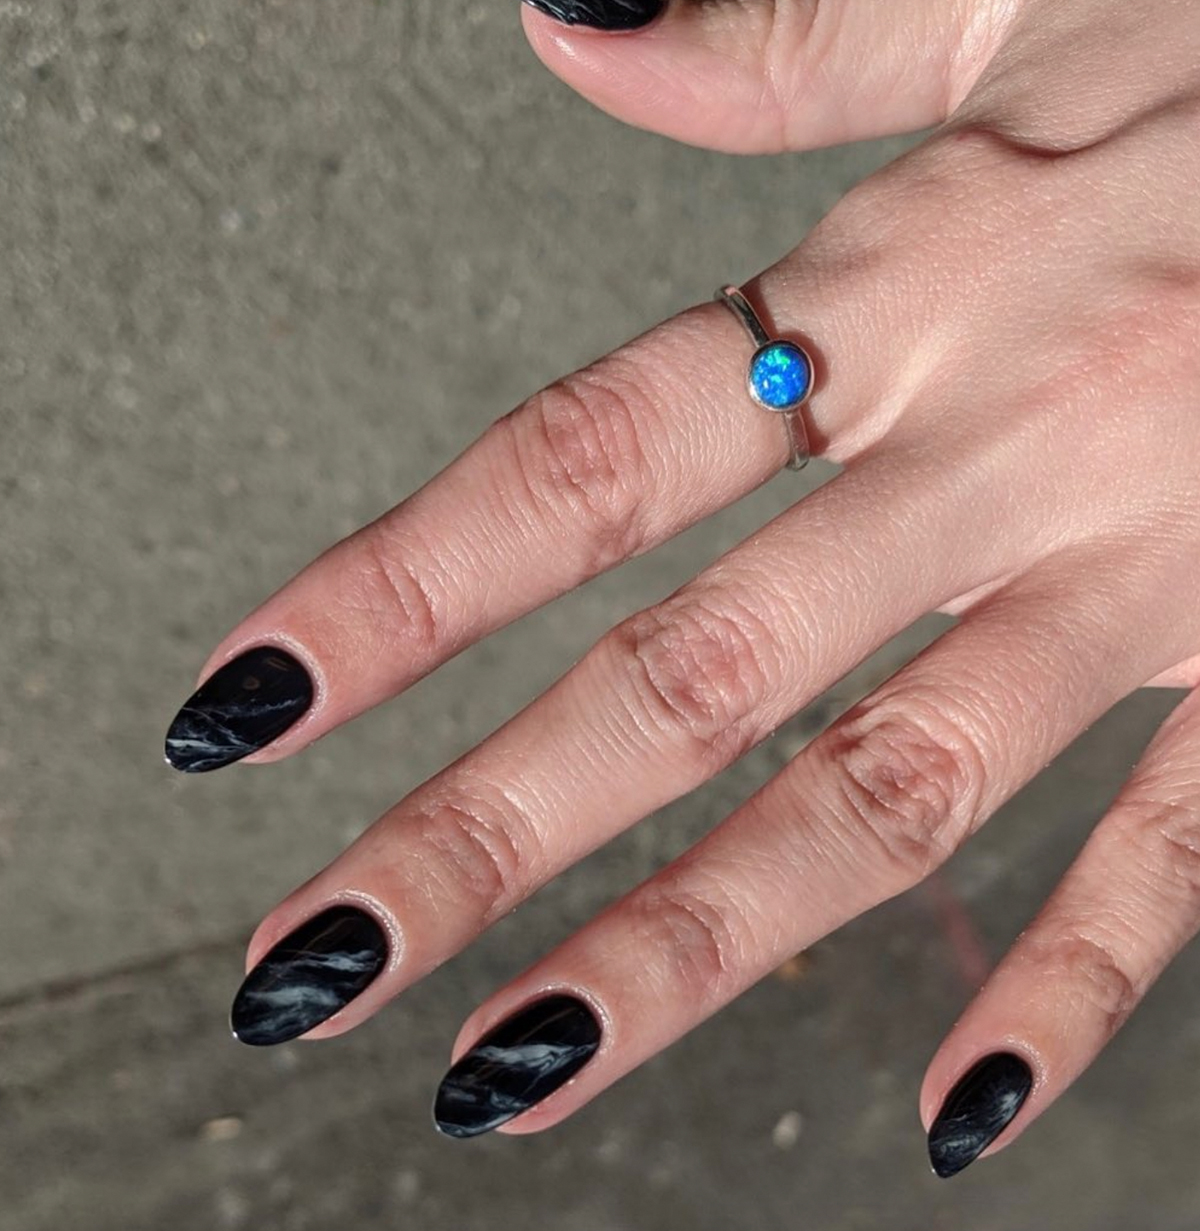 The 15 Best Black Nail Designs That Are Simple and Chic | Who What Wear